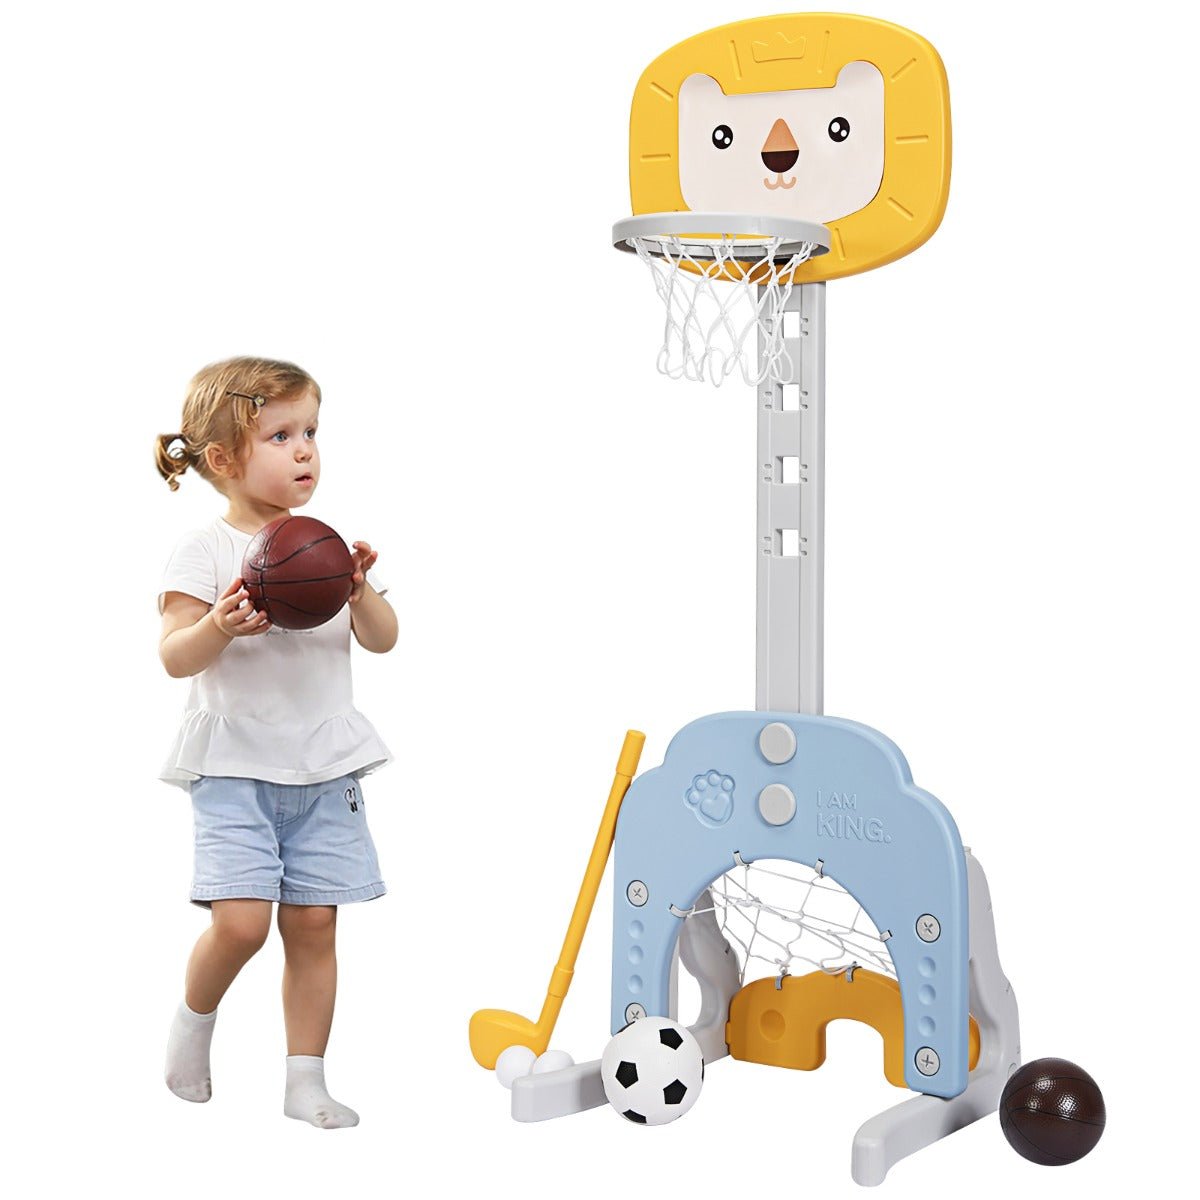 Kids Playground Set with Adjustable Basketball Stand: Active Outdoor Fun